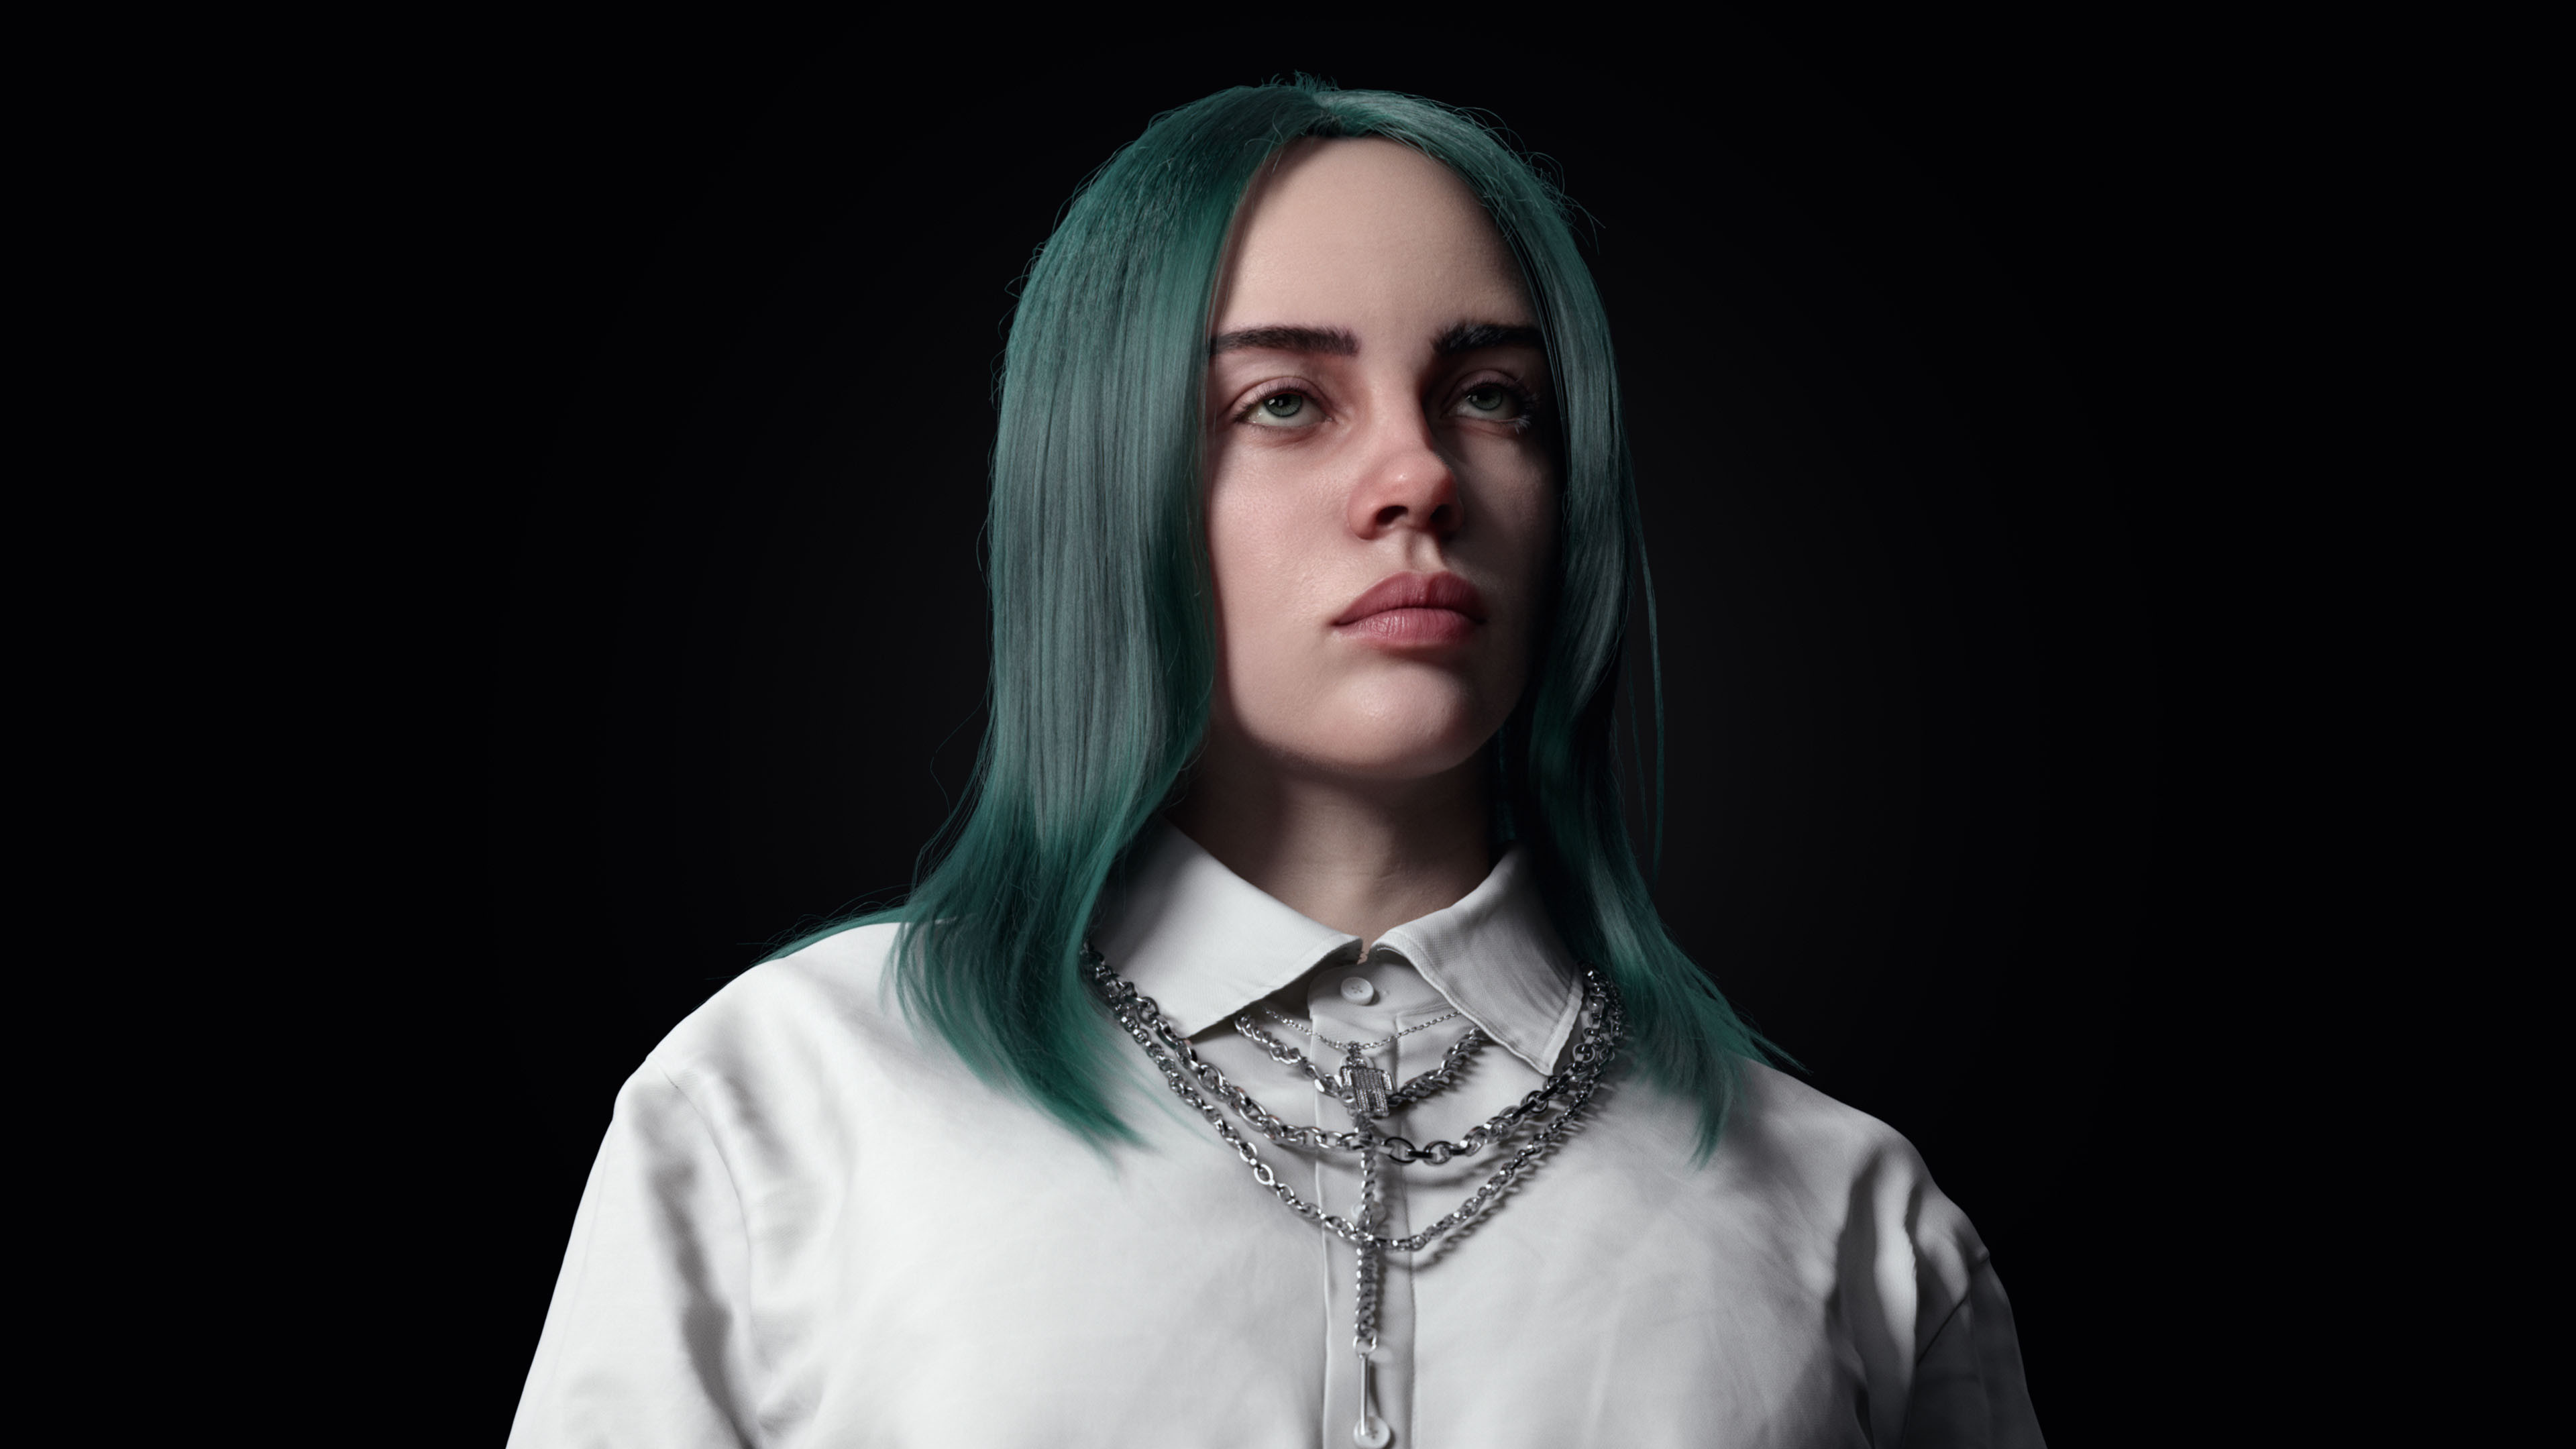 Billie Eilish Digital Art Bad Guy Green Hair Chains Jewelry Thick Eyebrows Buttons Clothes White Shi 3840x2160